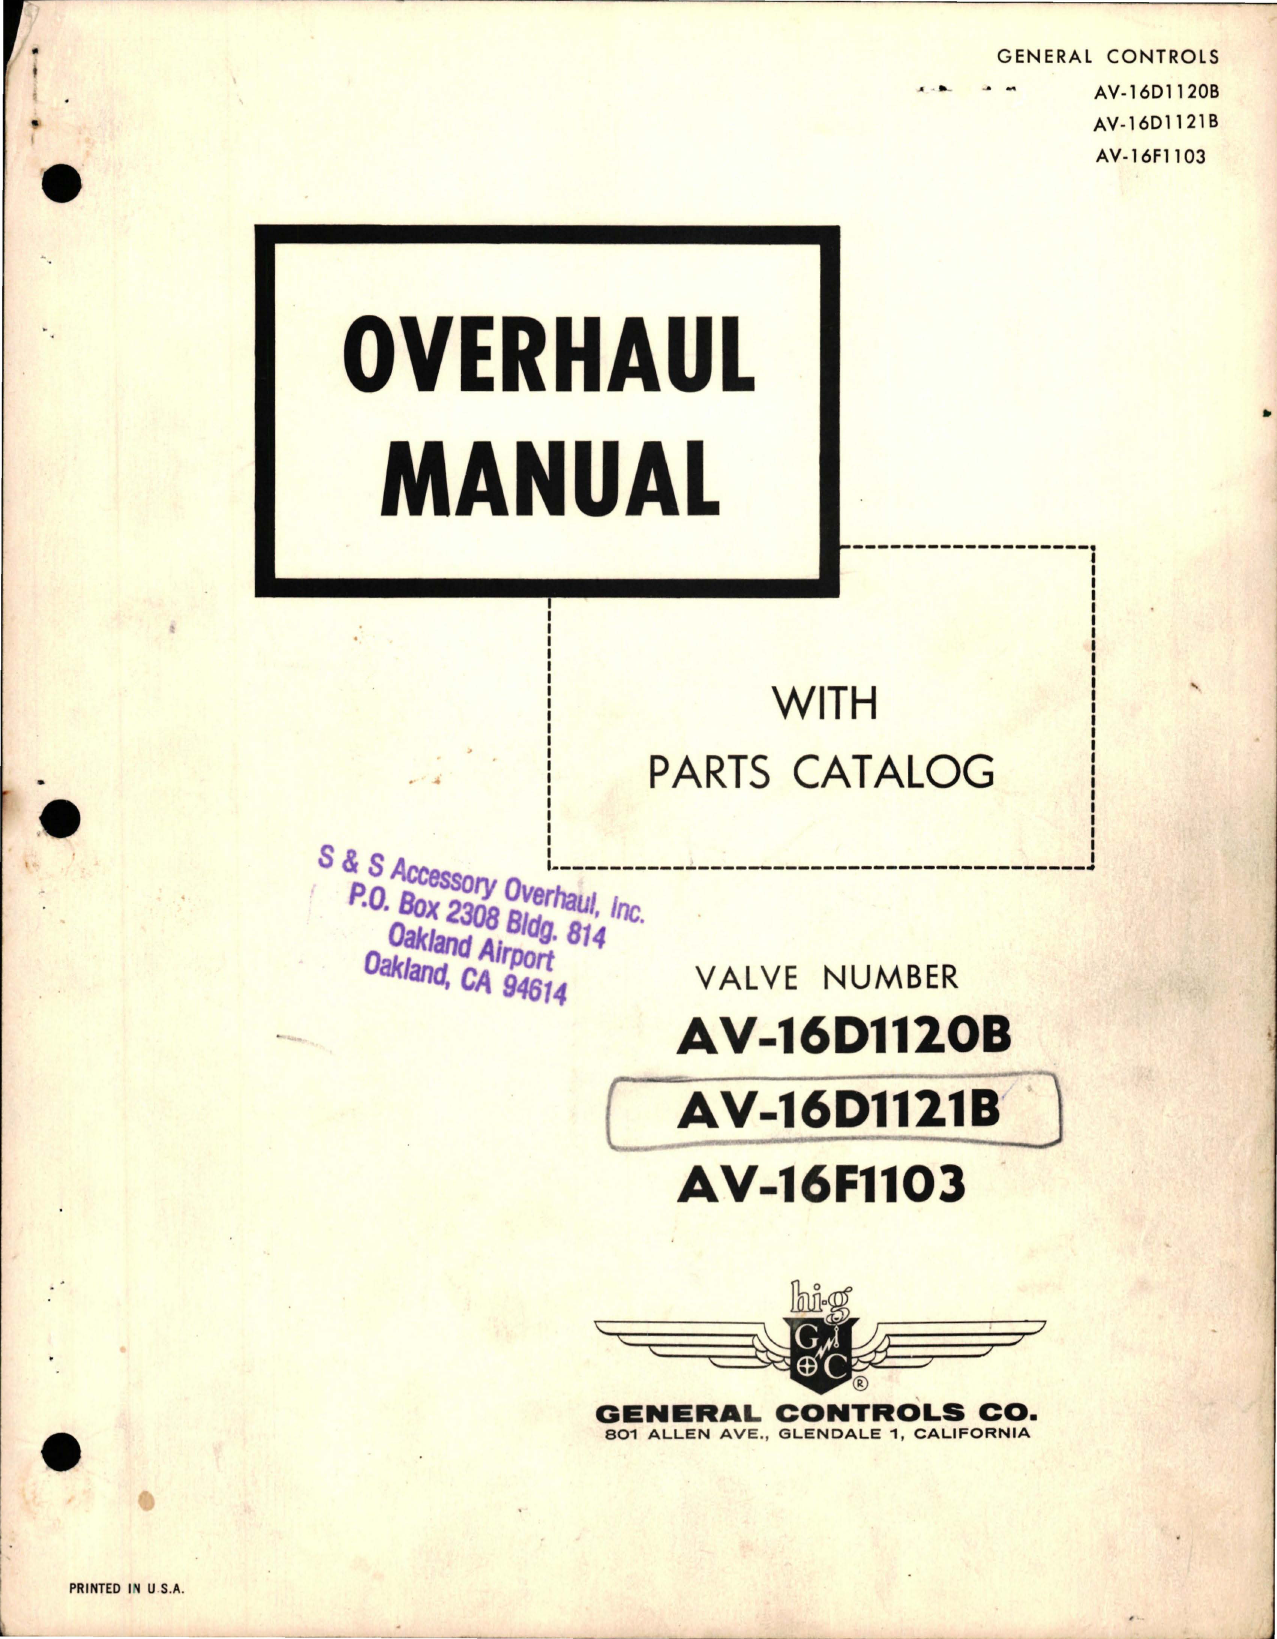 Sample page 1 from AirCorps Library document: Overhaul Manual with Parts Catalog for Manually Operated Rotary Plug Valve - AV-16D1120B, AV-16D1121B, and AV-16F1103